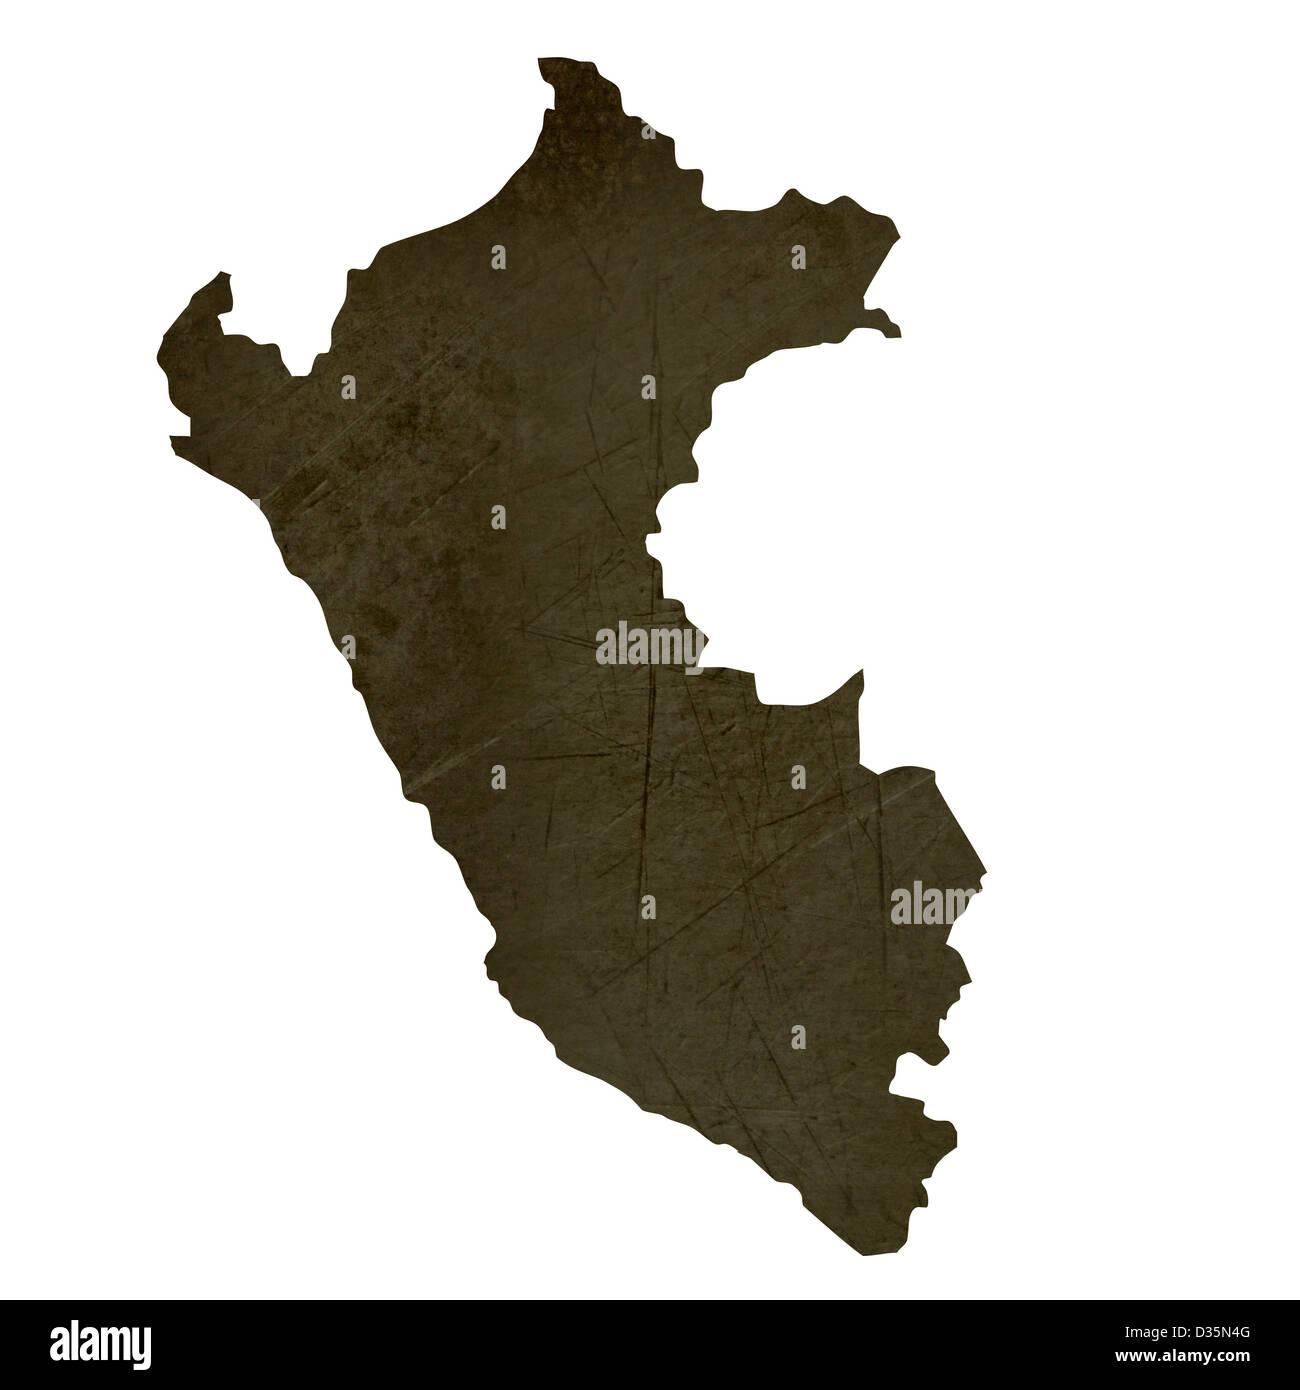 Dark silhouetted and textured map of Peru isolated on white background. Stock Photo